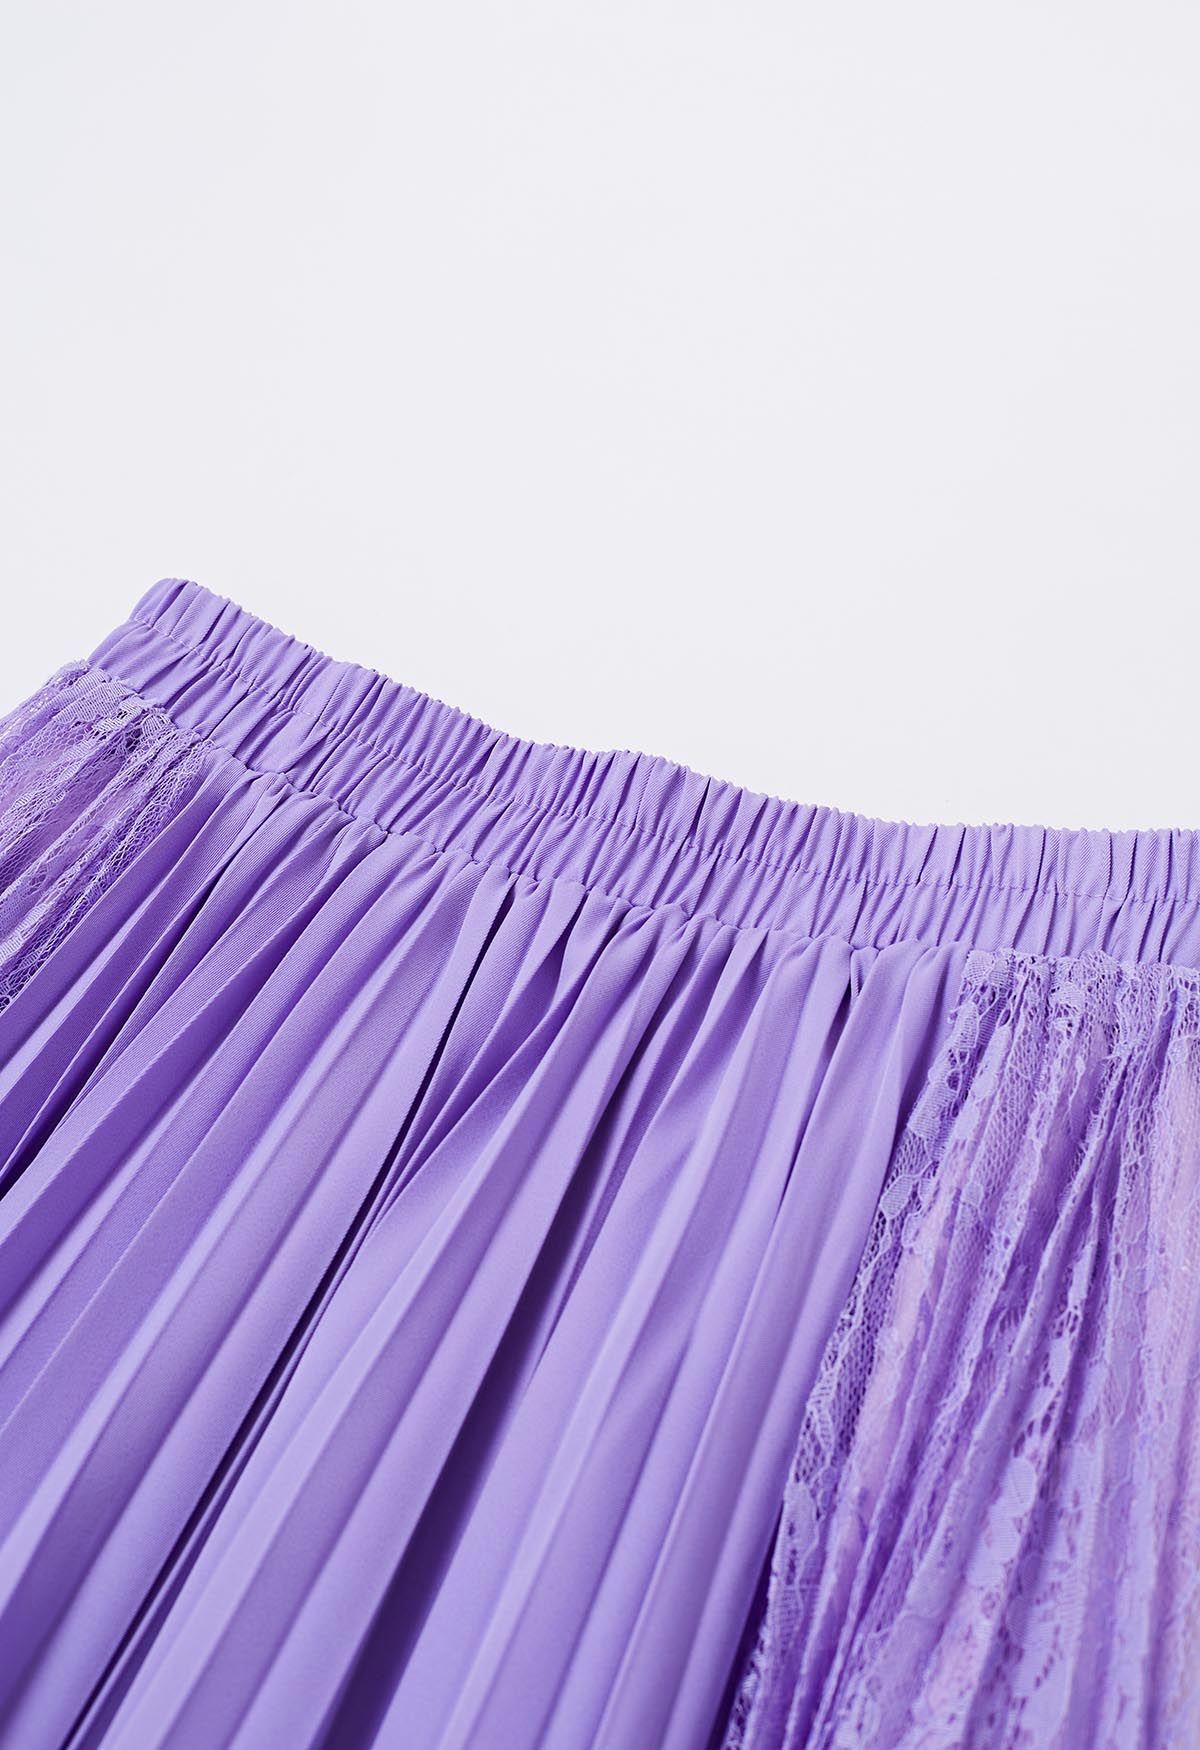 Lace Panelled Pleated Midi Skirt in Lilac